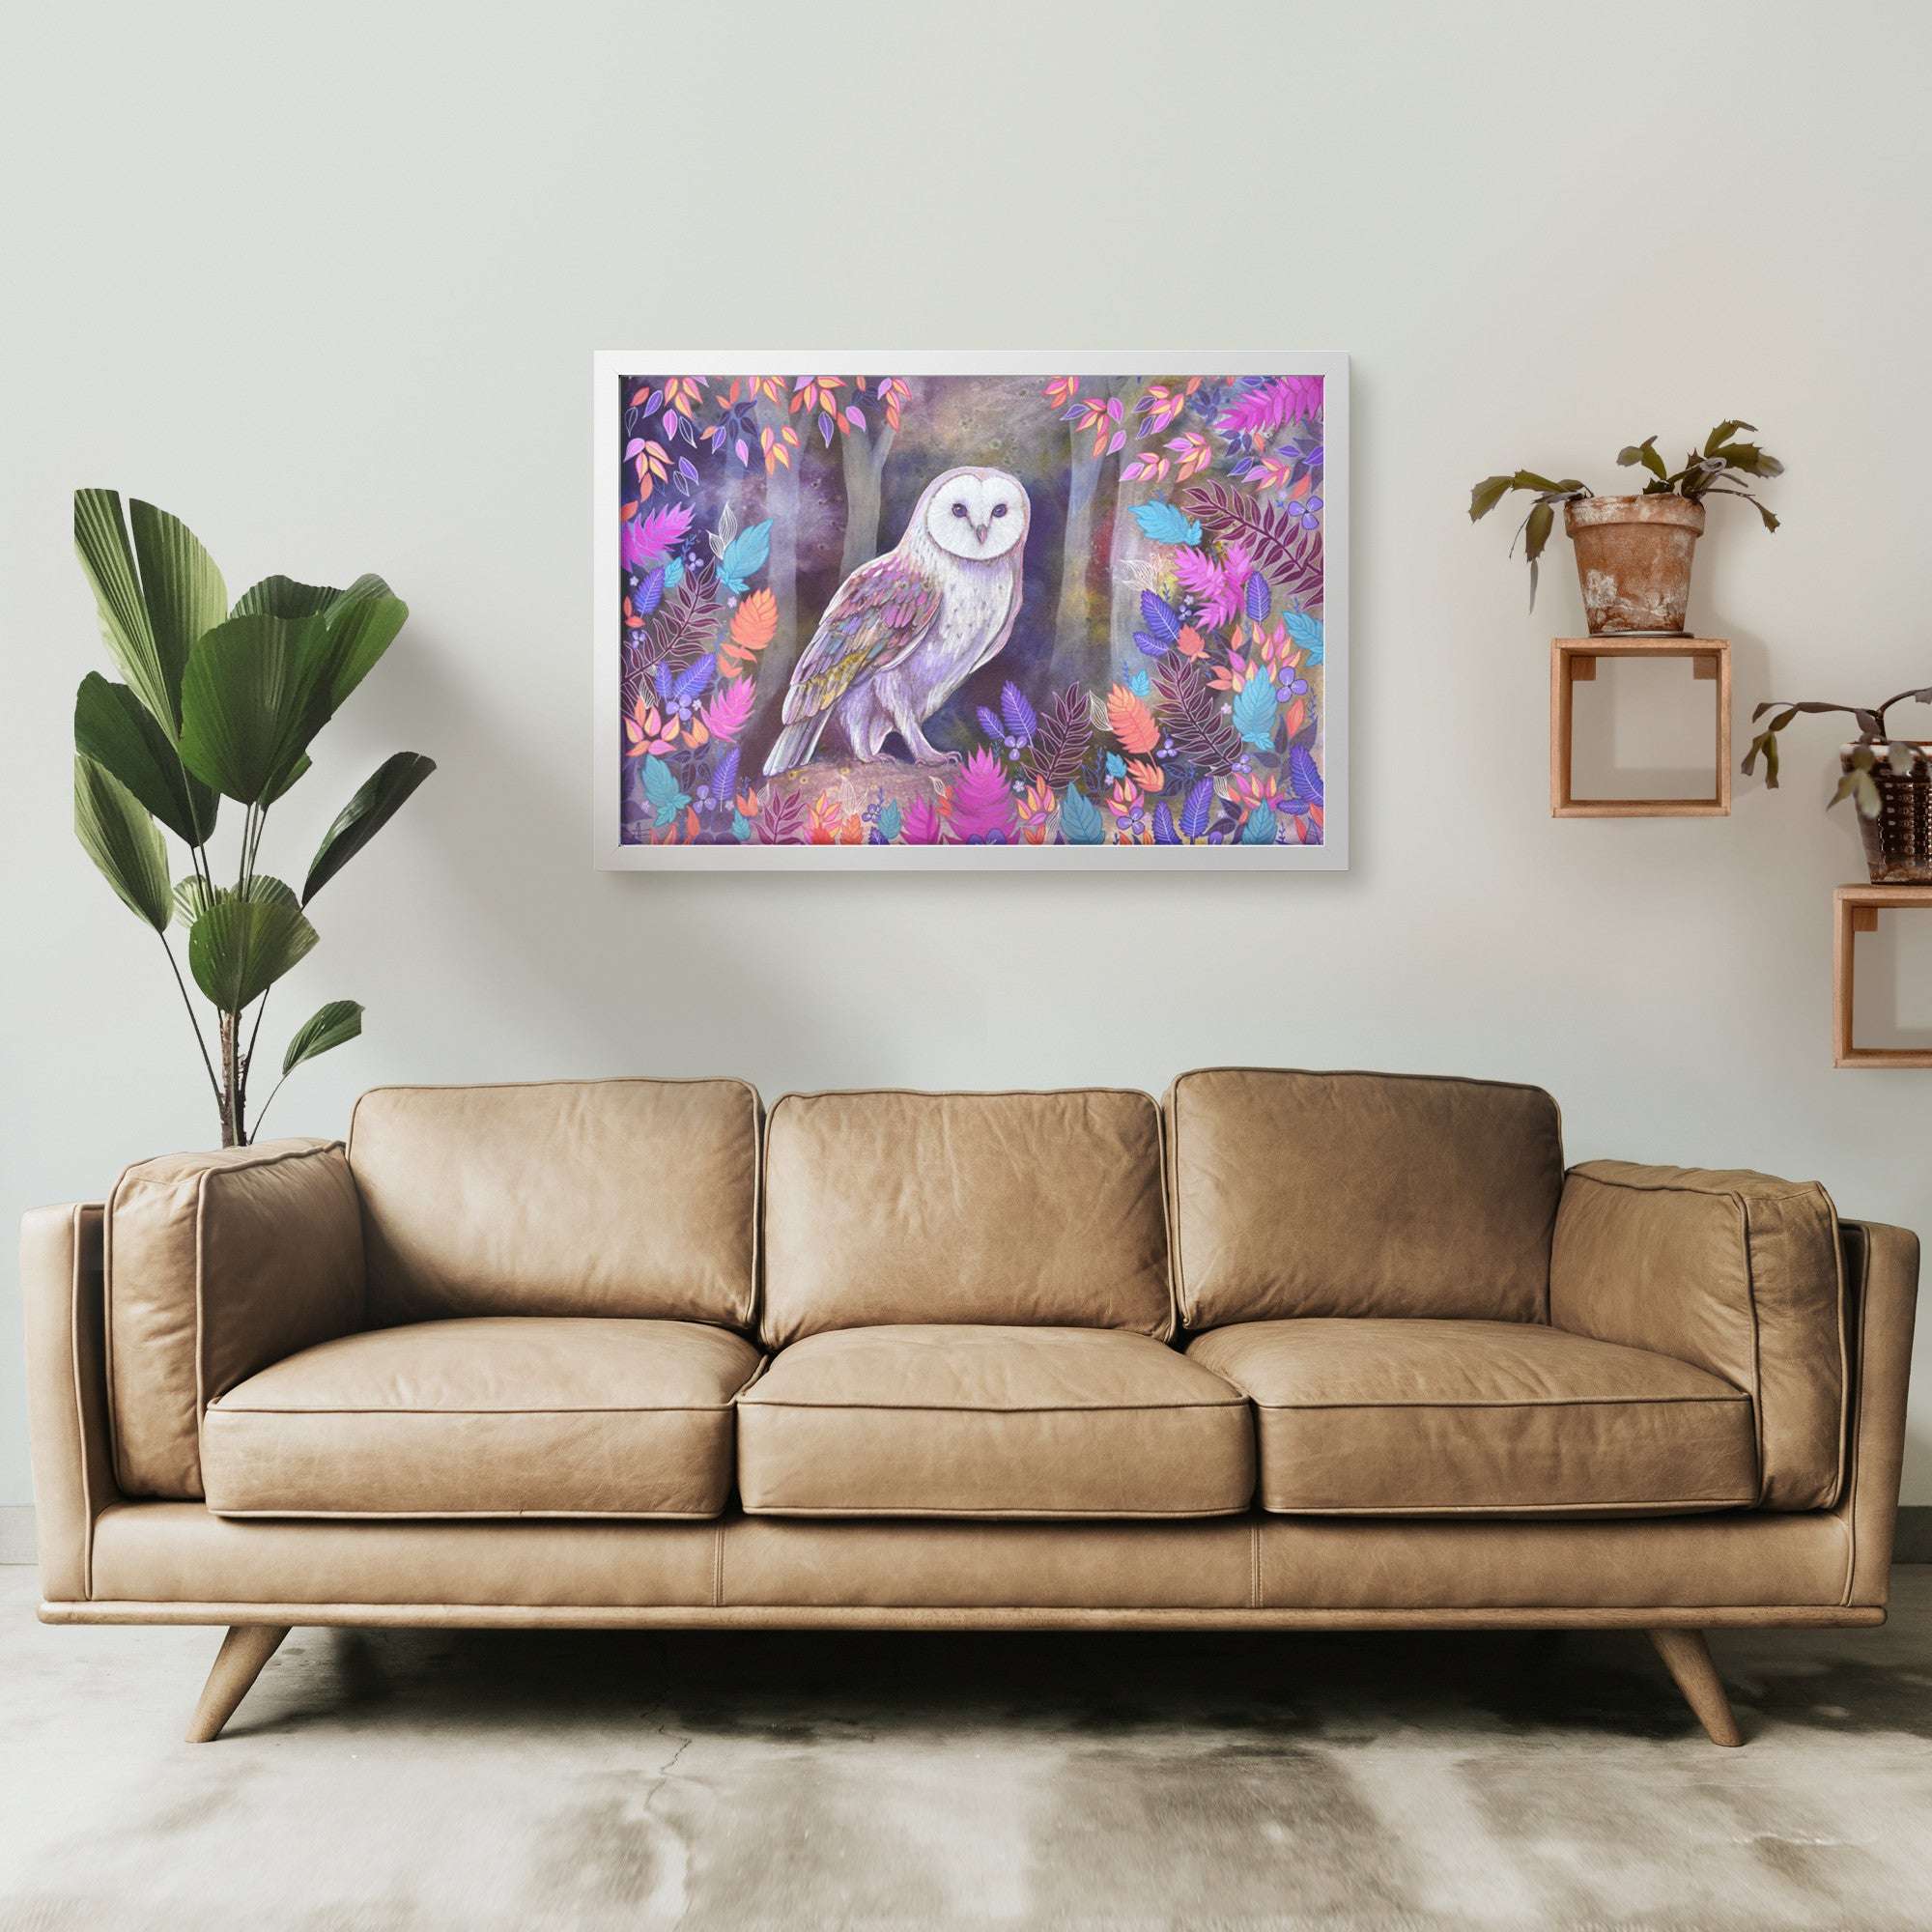 A modern living room, a colorful Framed Owl Art Print hangs on the wall